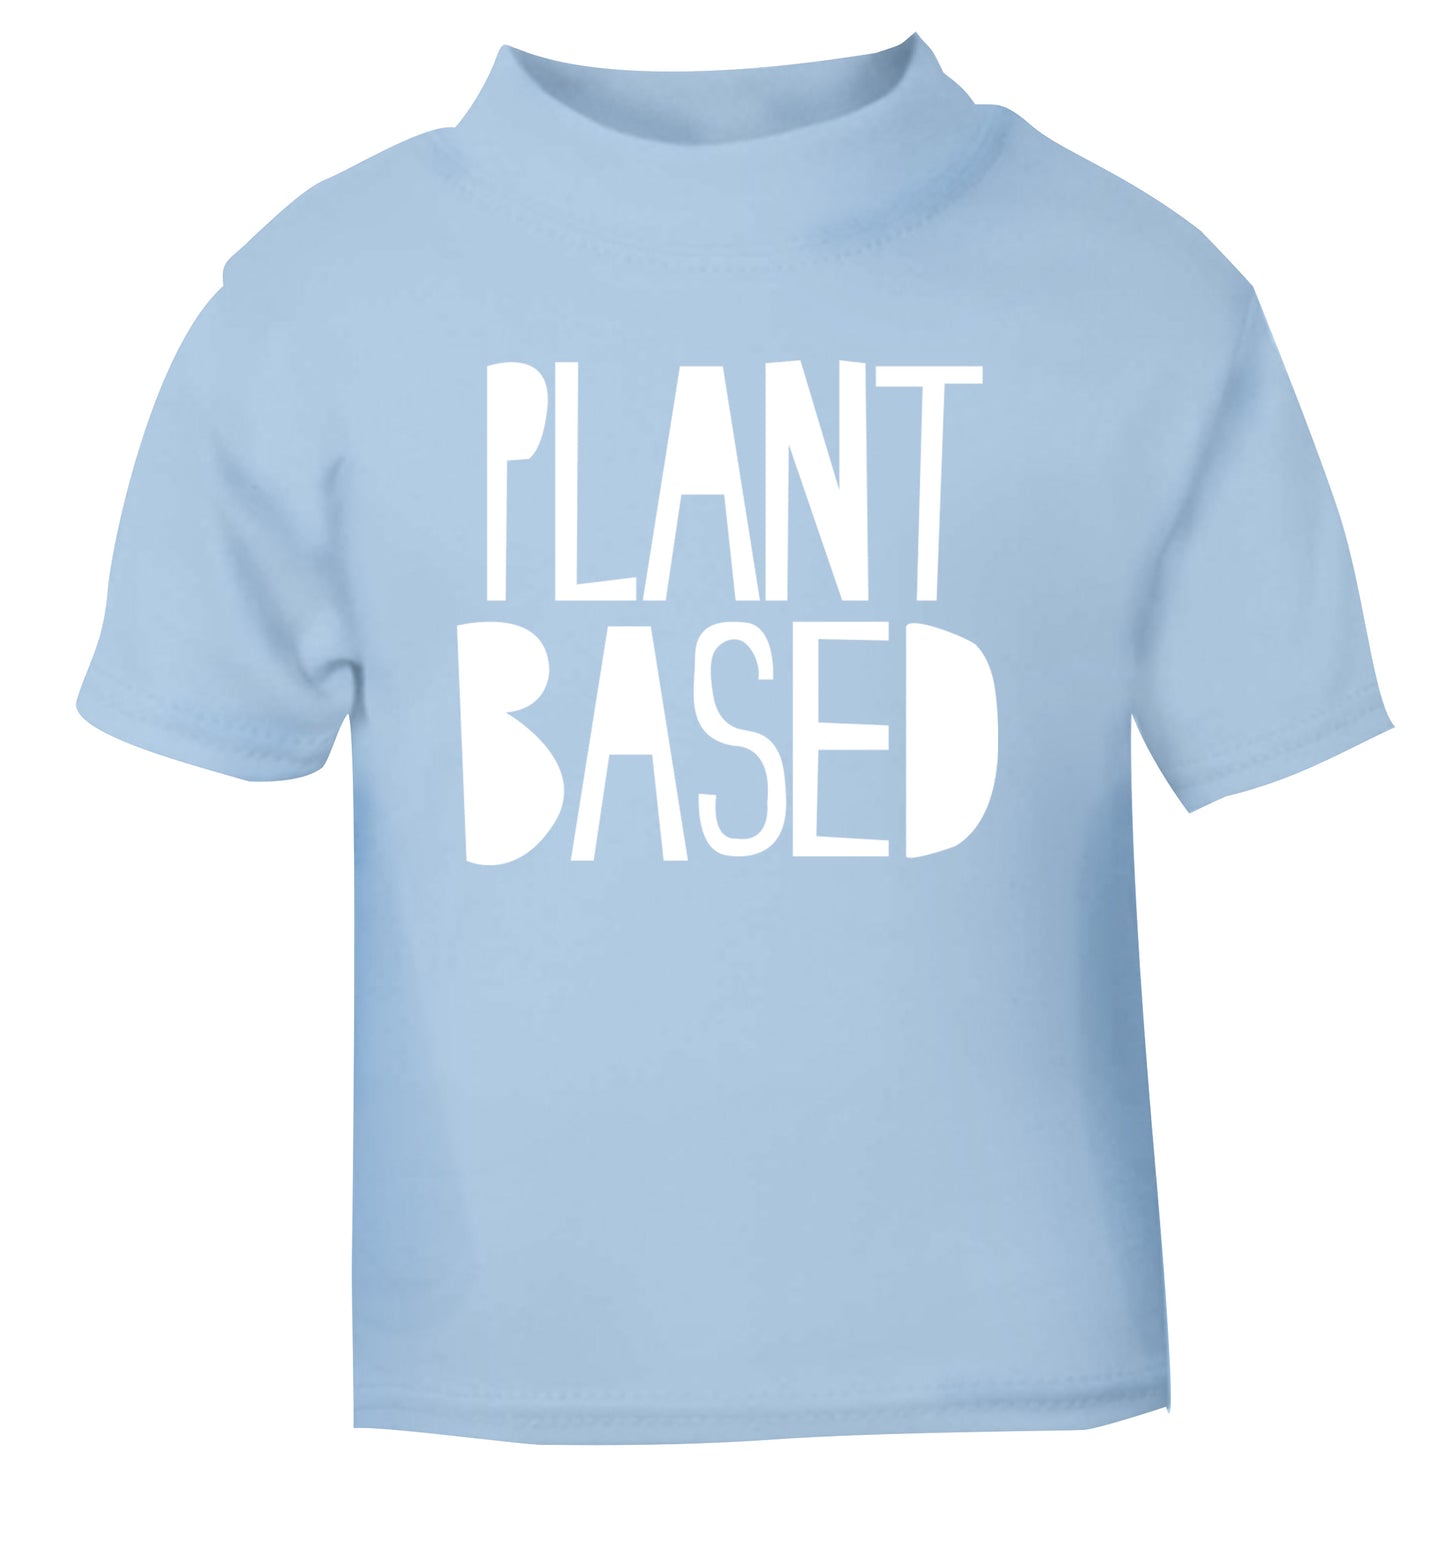 Plant Based light blue Baby Toddler Tshirt 2 Years